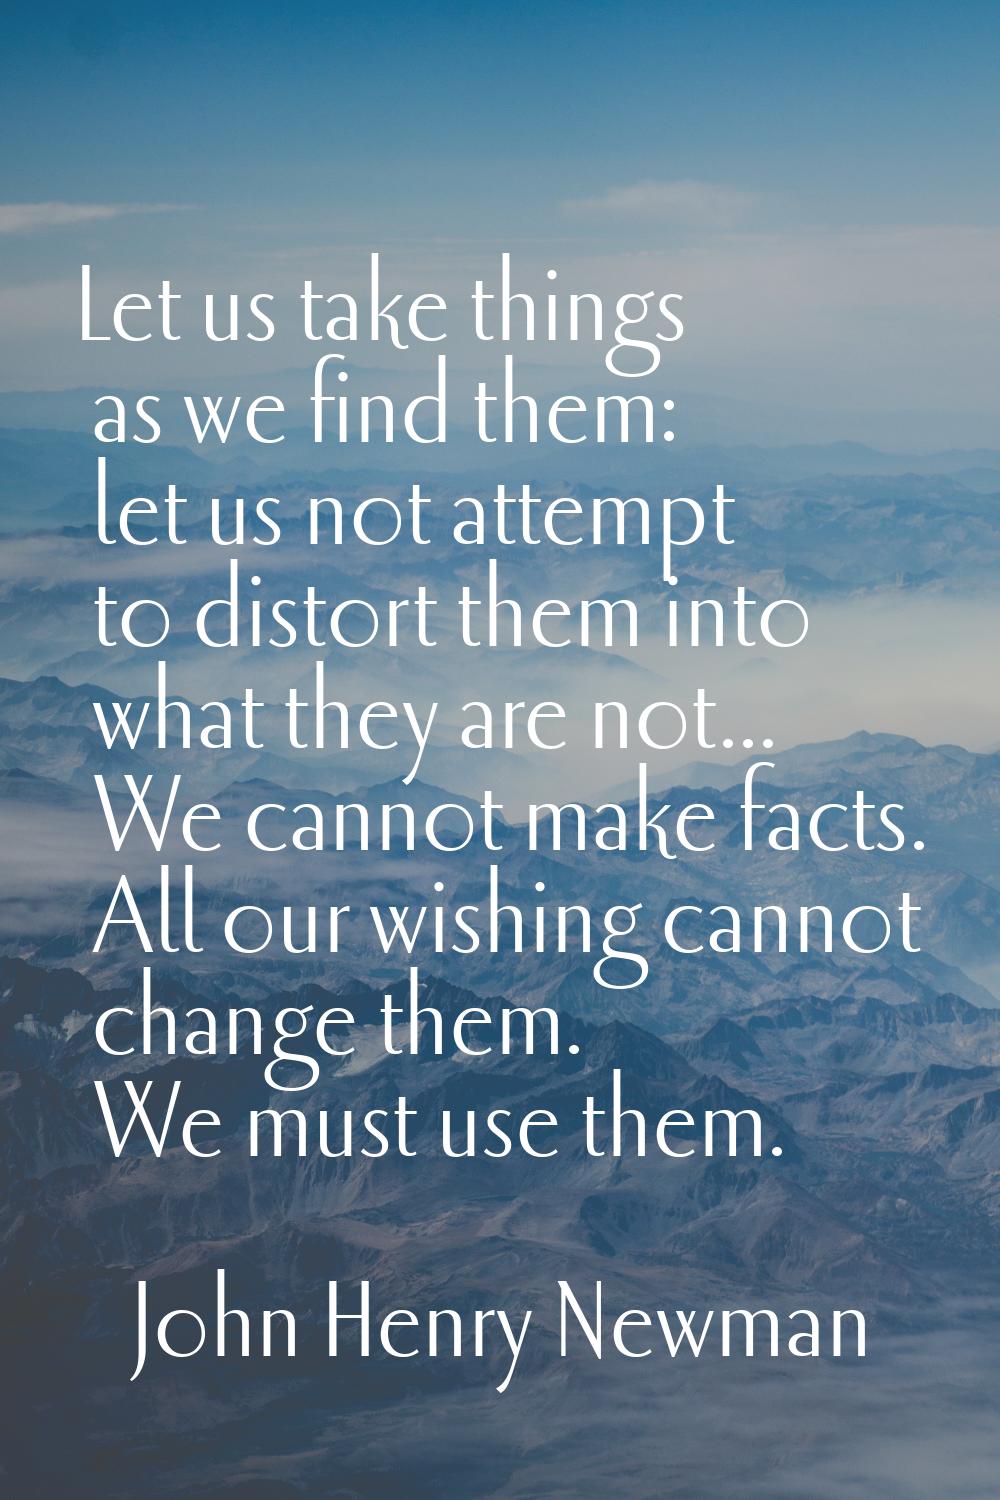 Let us take things as we find them: let us not attempt to distort them into what they are not... We